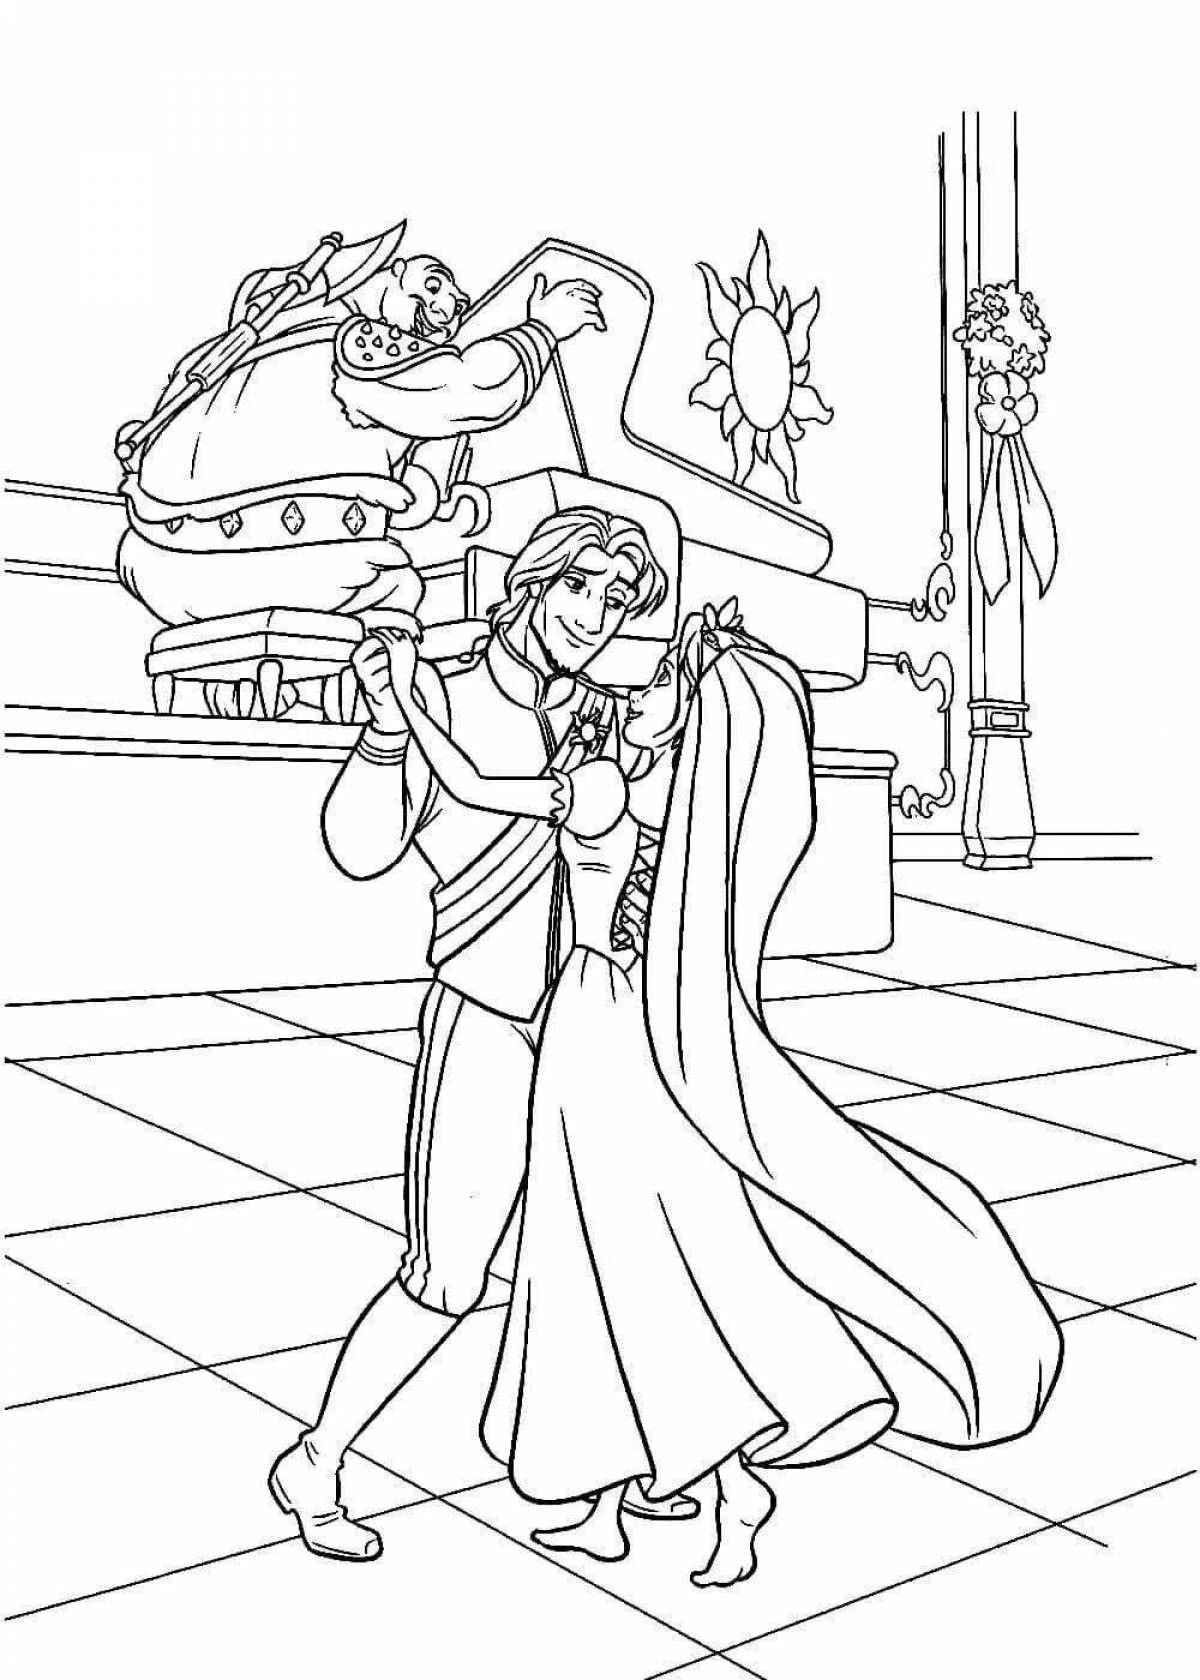 Radiant coloring page rapunzel new story